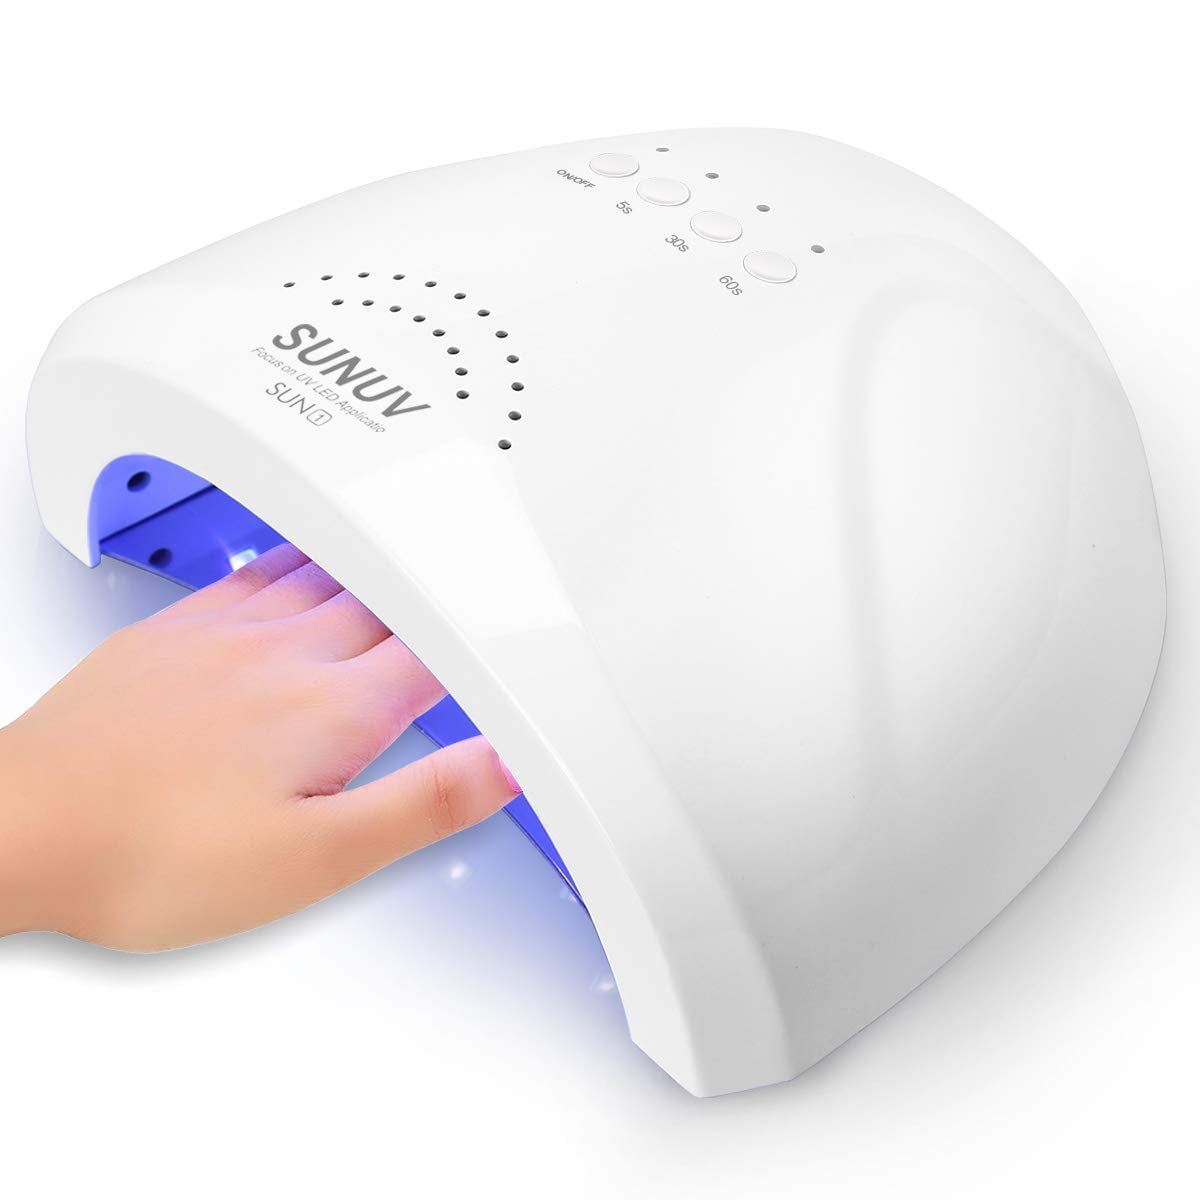 Nail Dryer Fan Nail Polish Dryer Manicure Nail Lamp For Gel Nails Polish  With Heat & Cool Wind Blower Air Nail Dryer 300W - AliExpress